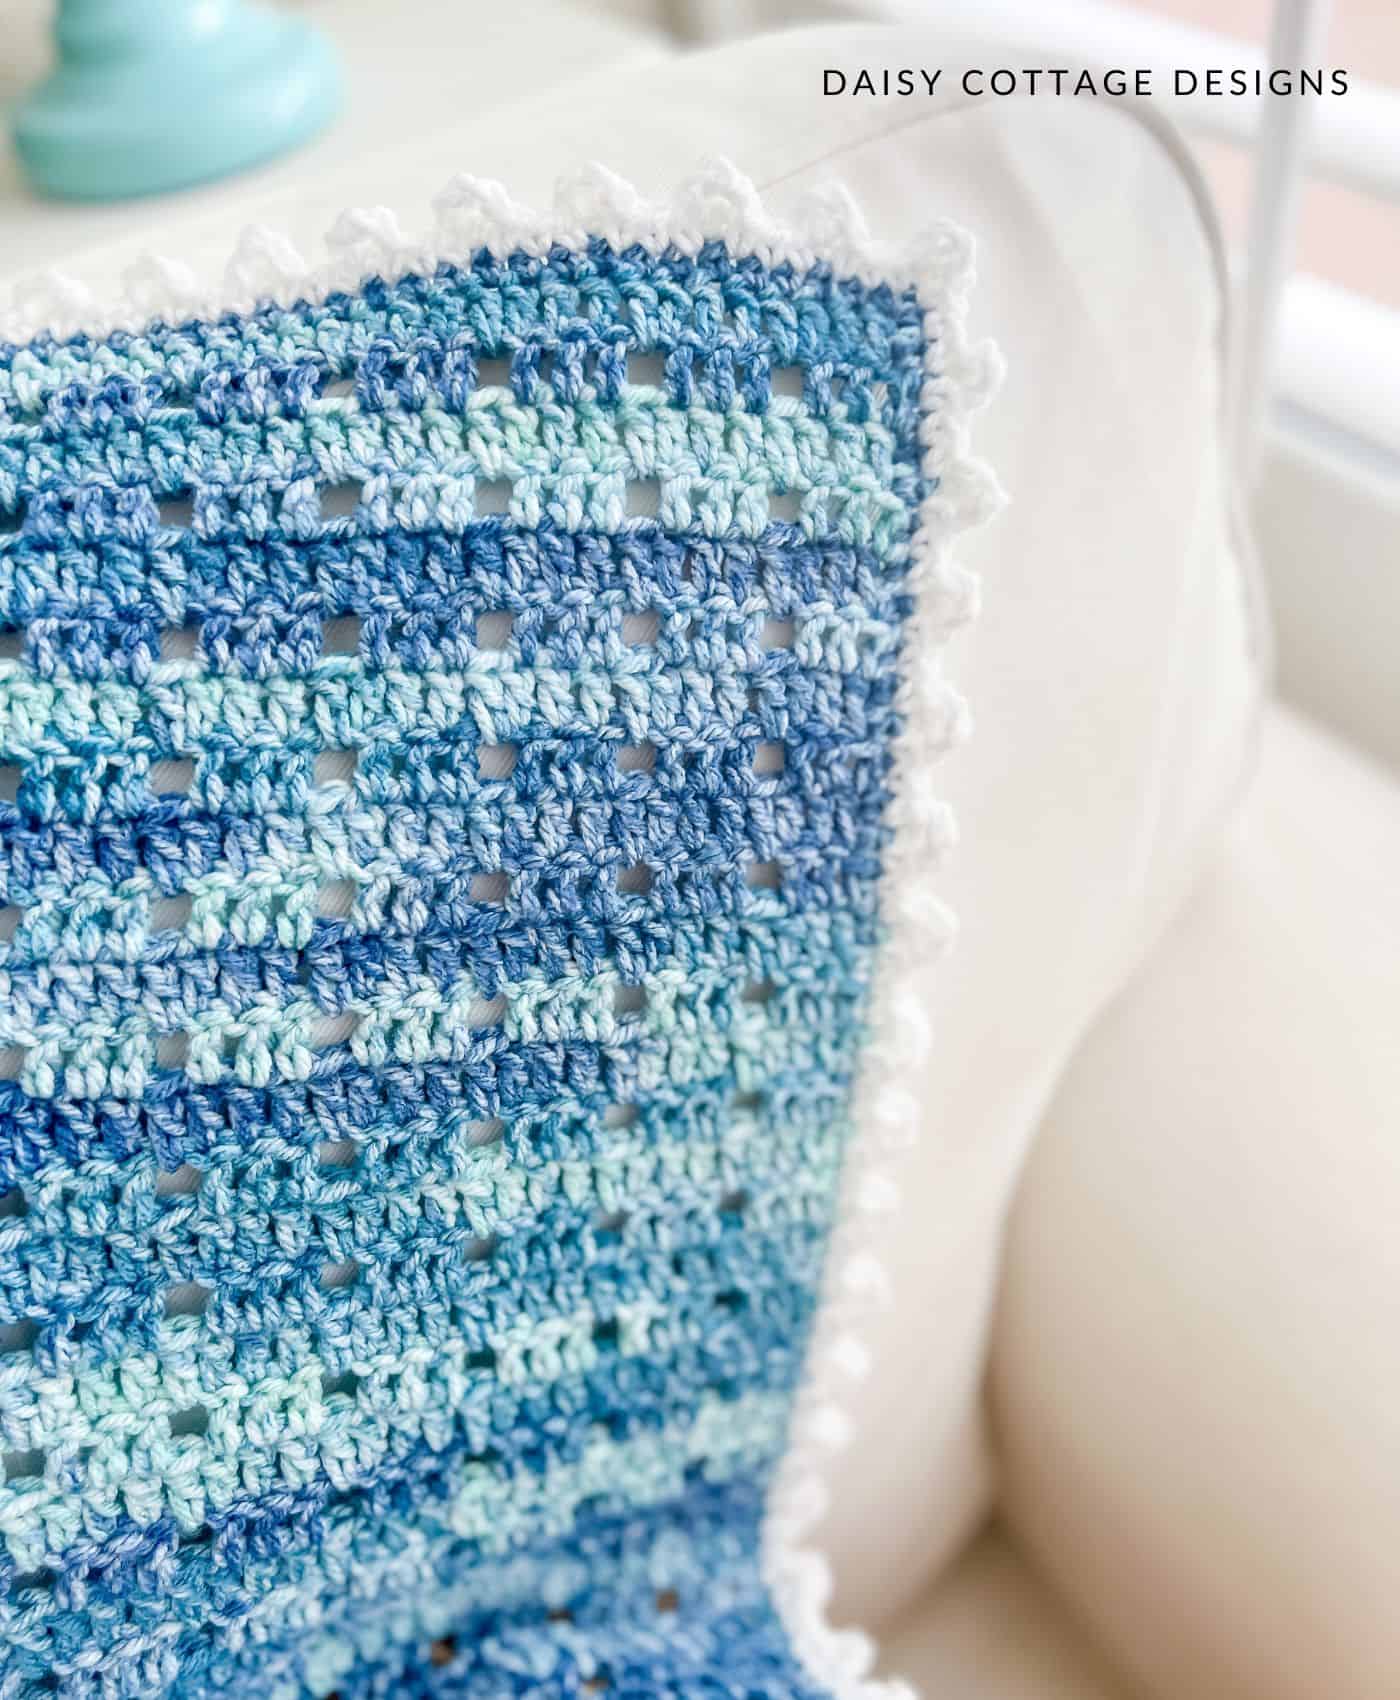 Double crochet blanket with white picot border